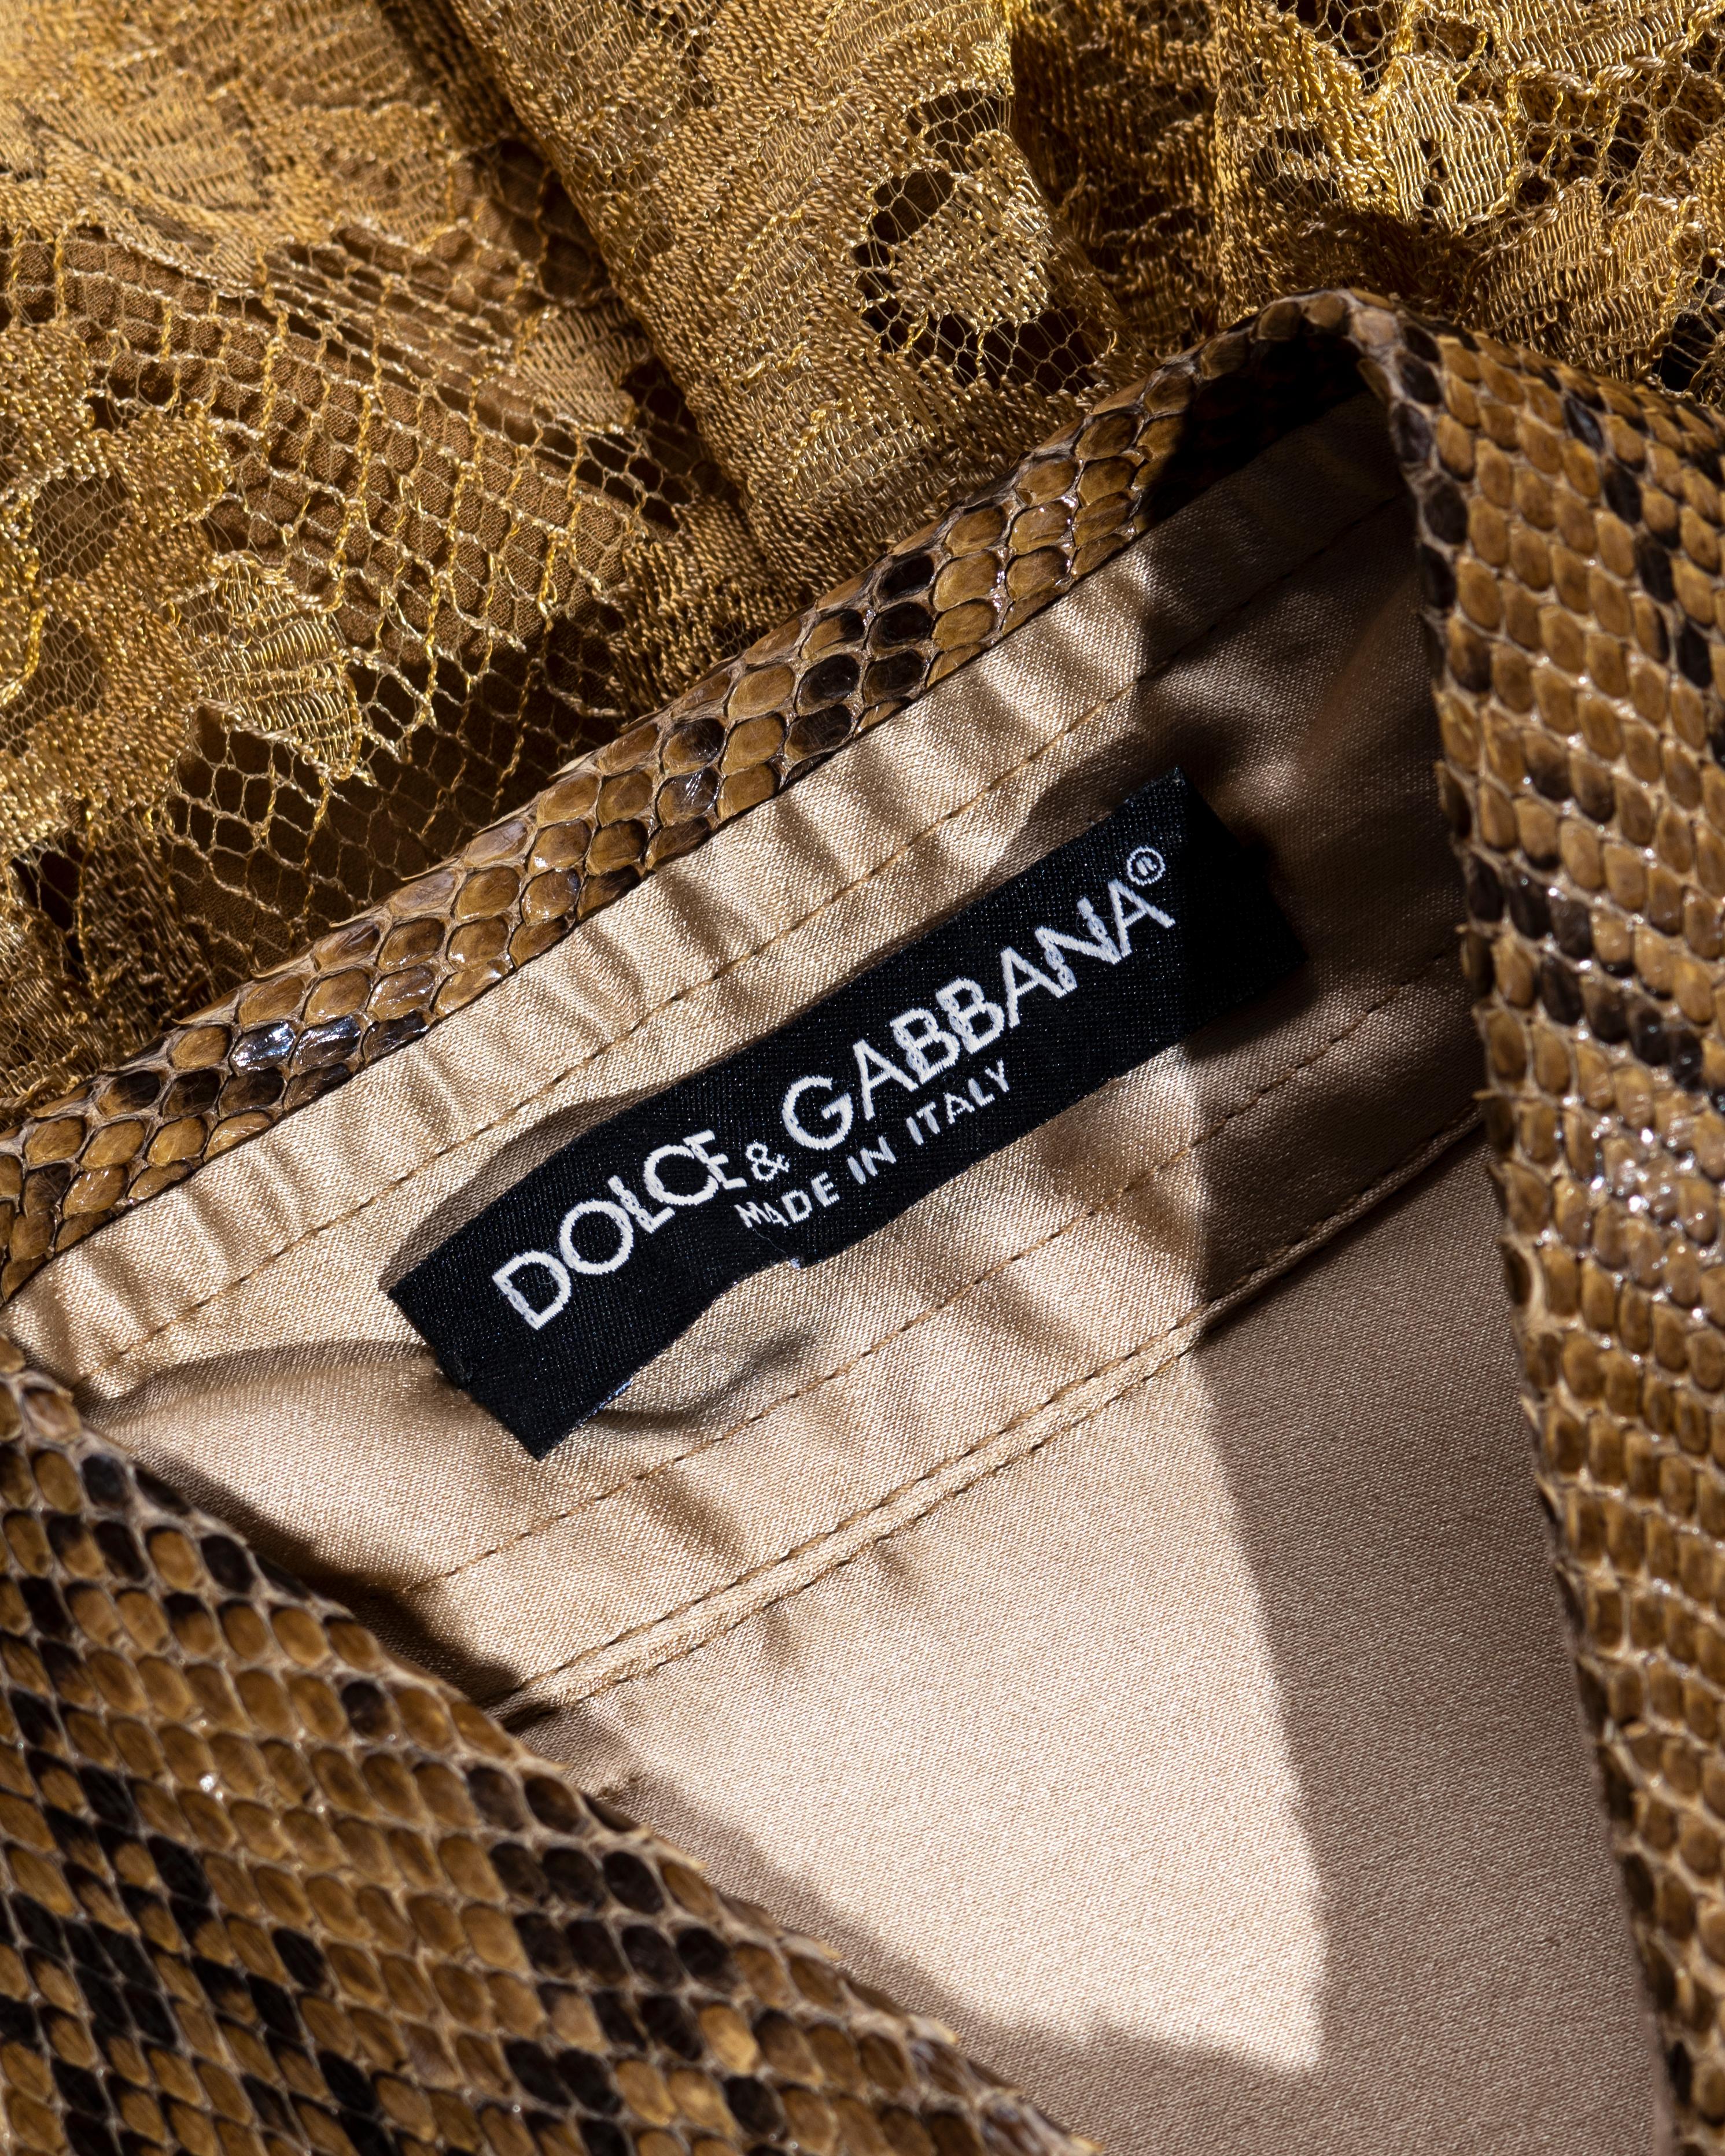 Dolce & Gabbana gold lace and python shirt dress, ss 2005 For Sale 2